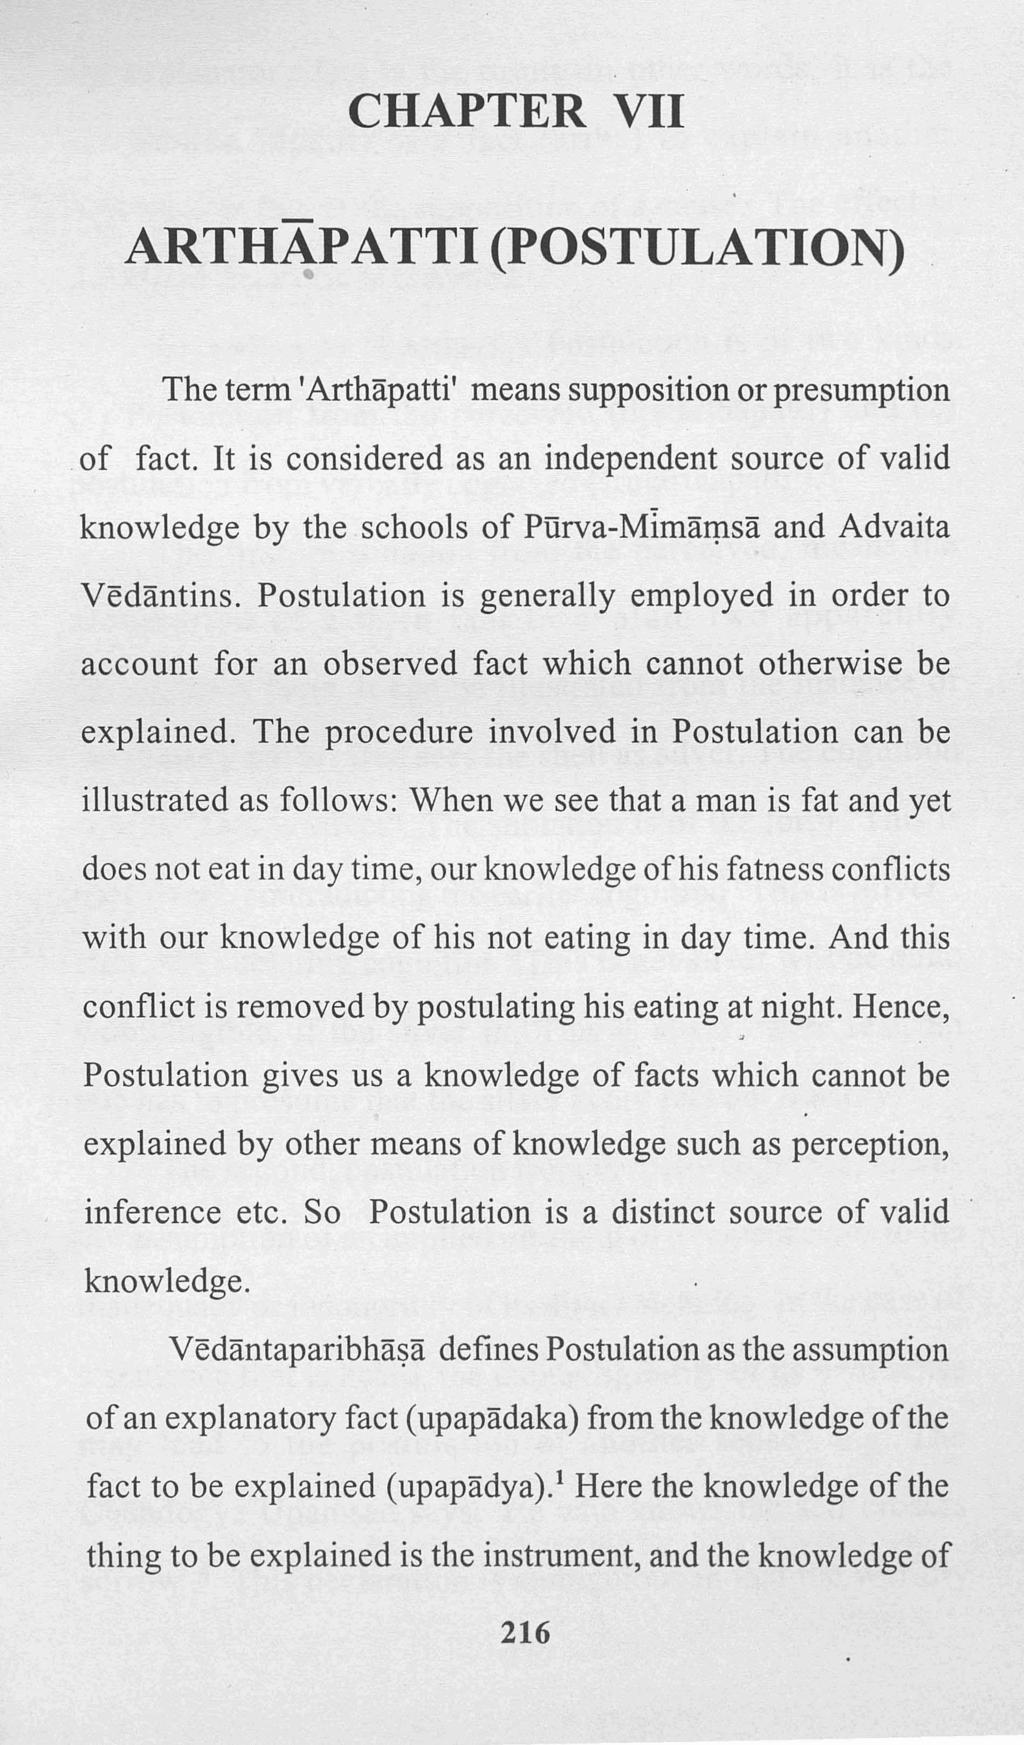 CHAPTER VII ARTHAPATTI (POSTULATION) The term 'Arthapatti' means supposition or presumption.of fact. It is considered as an independent source of valid knowledge by the schools of Purva-Mimarp.